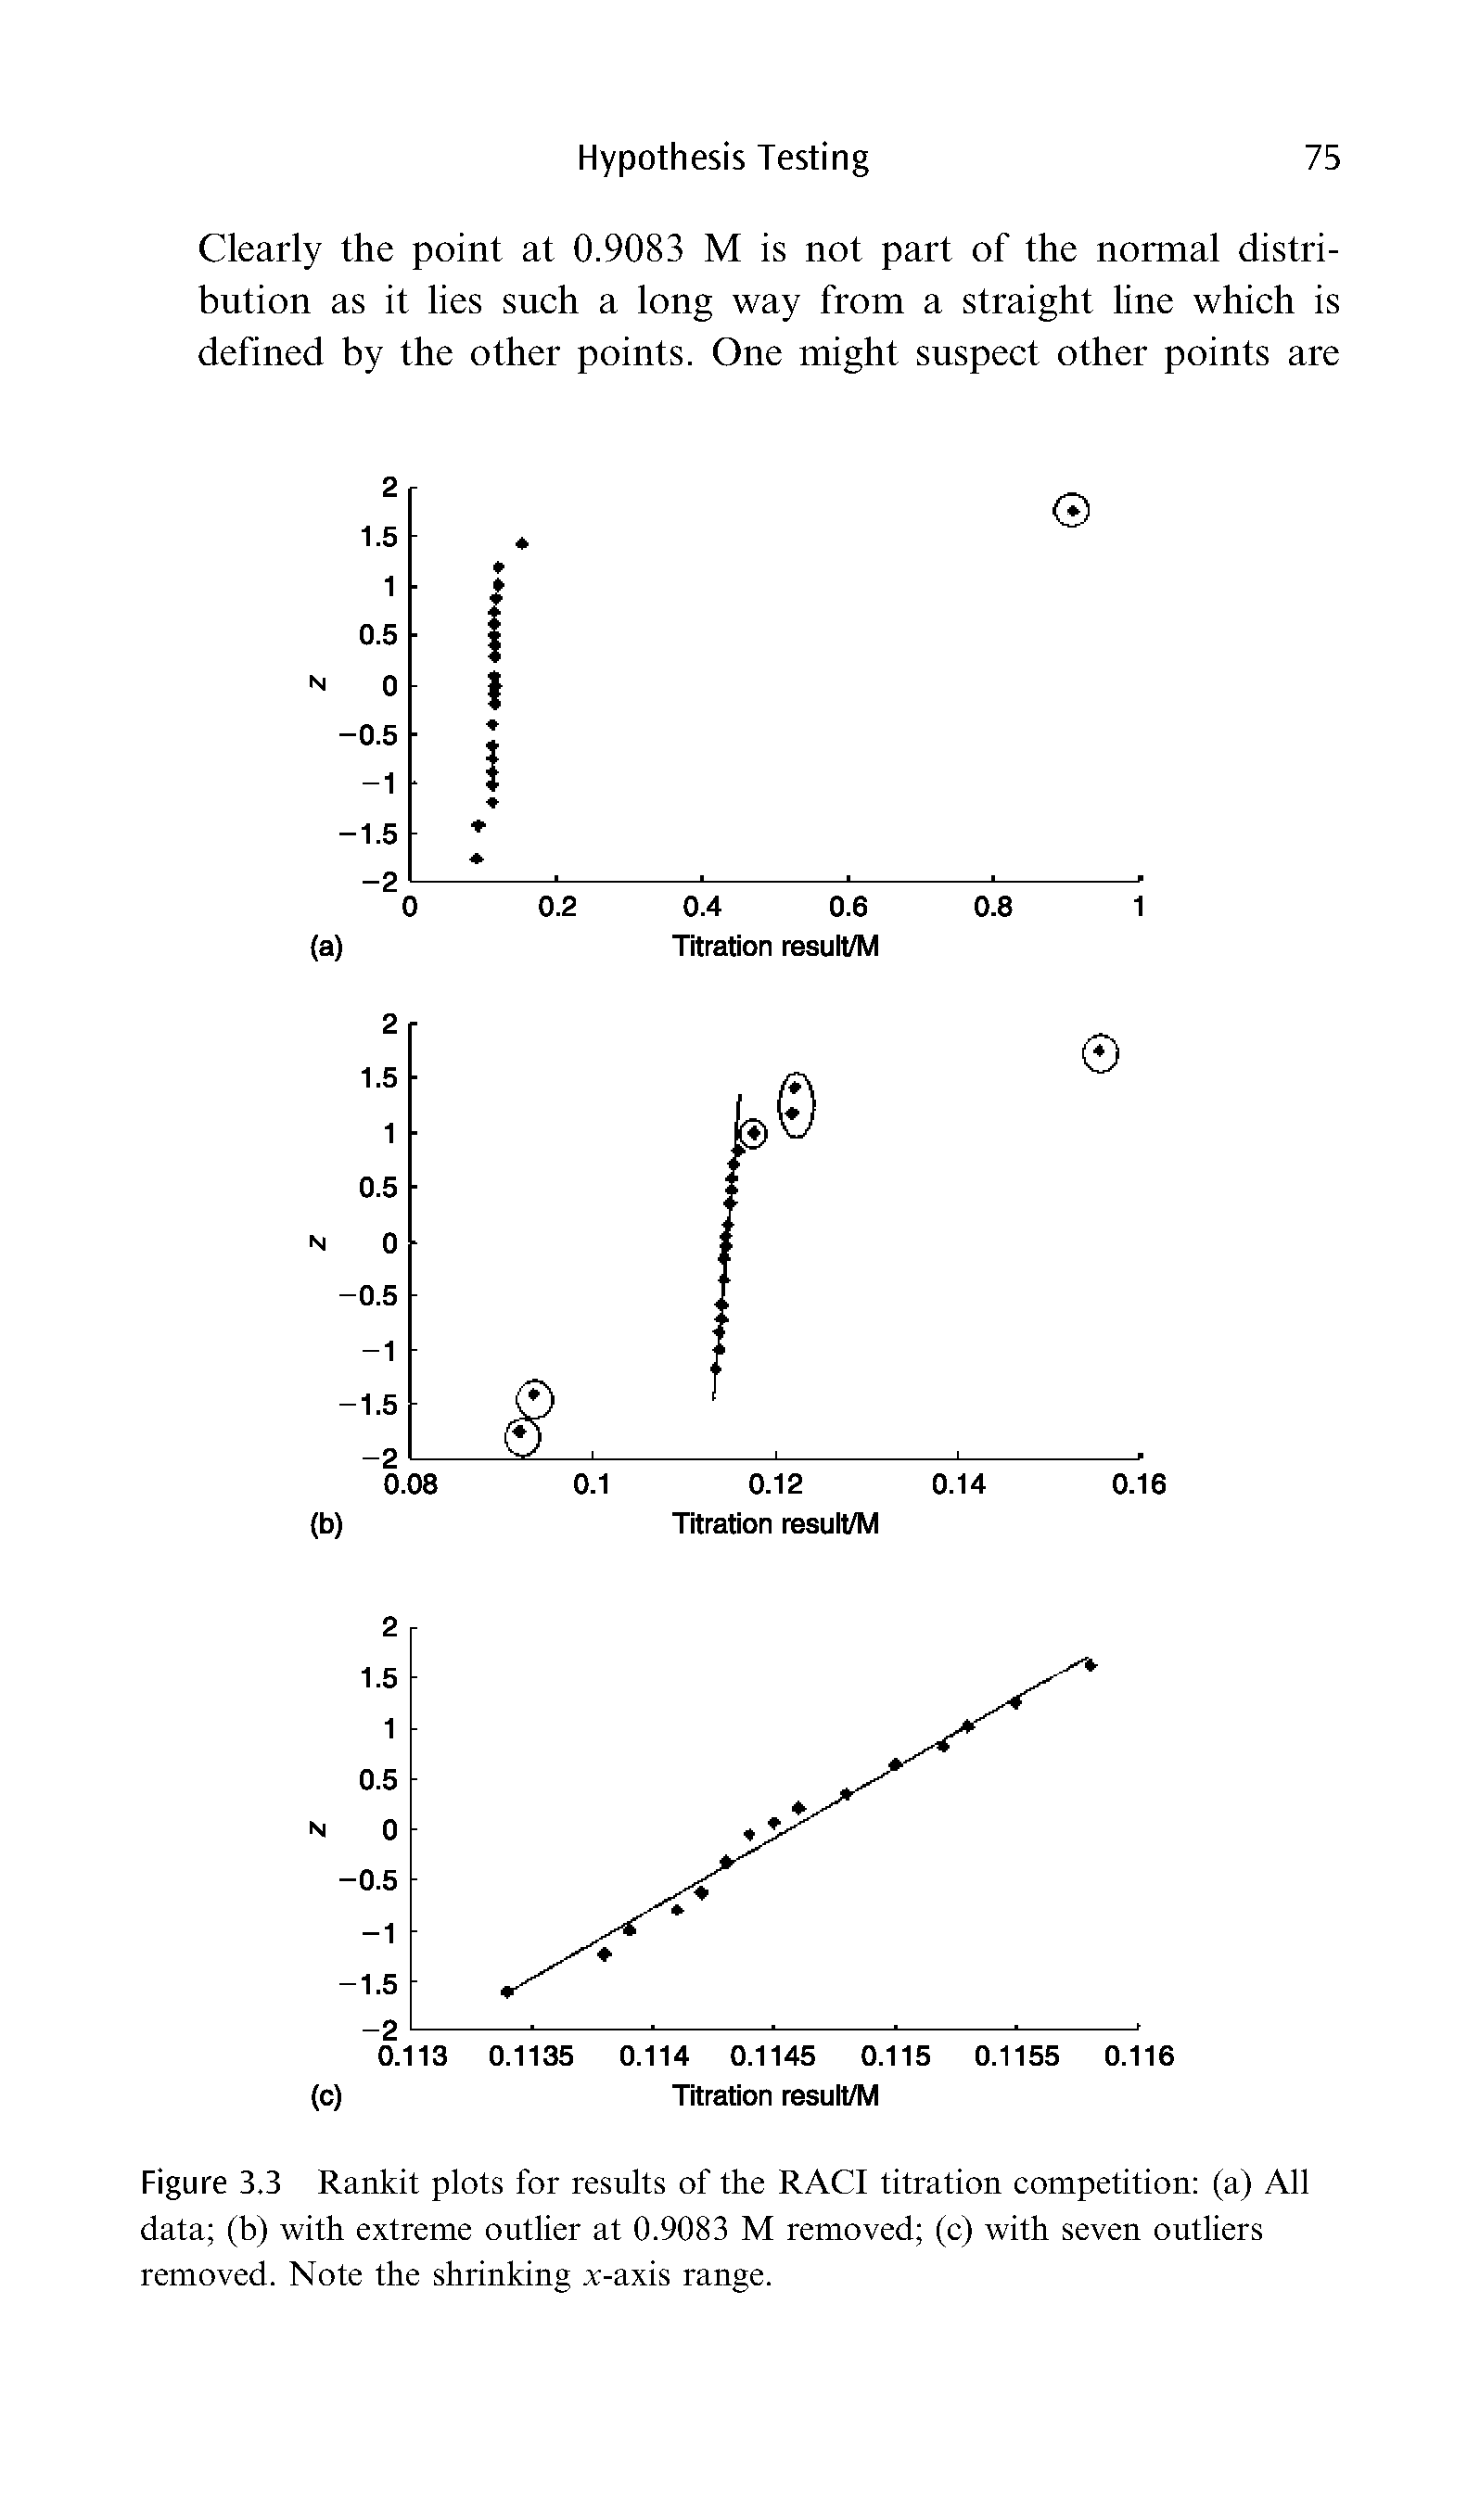 Figure 3.3 Rankit plots for results of the RACI titration competition (a) All data (b) with extreme outlier at 0.9083 M removed (c) with seven outliers removed. Note the shrinking x-axis range.